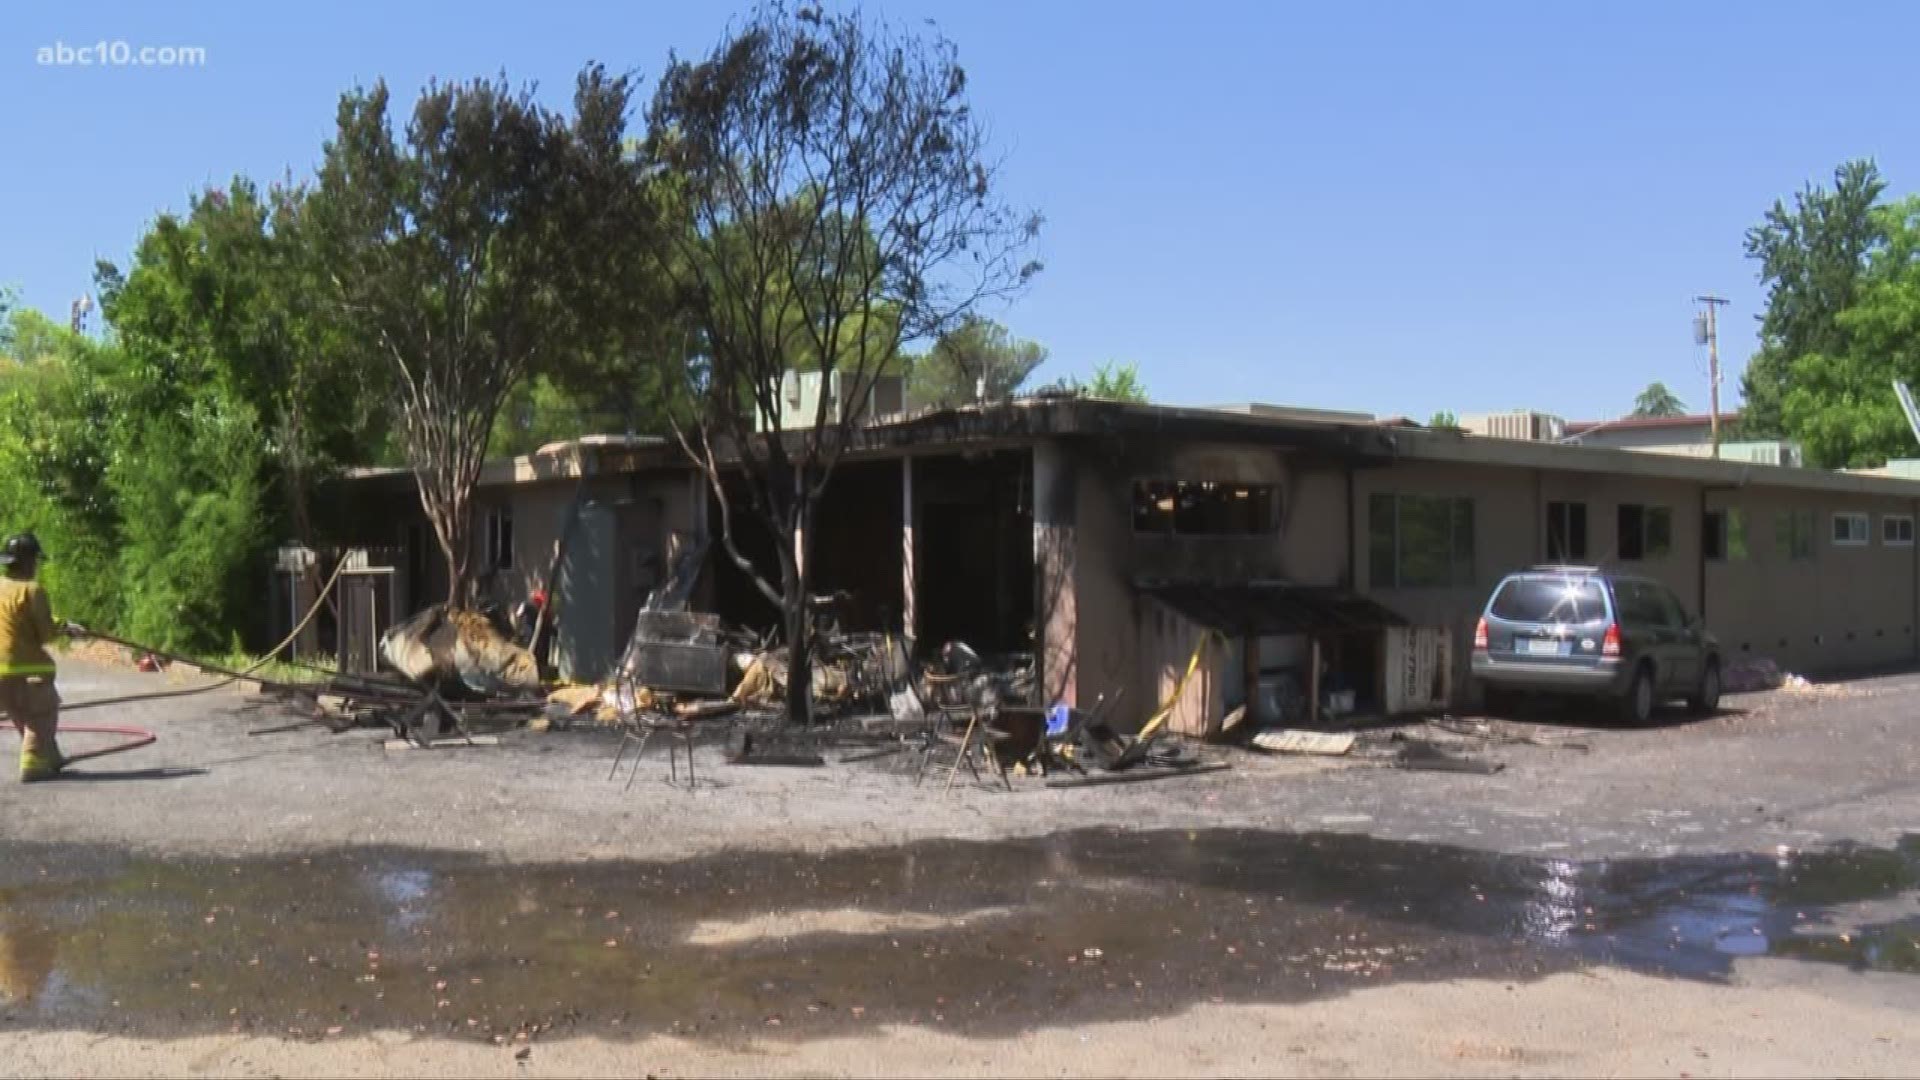 The fire started around 9 a.m. on Sunset Avenue in Fair Oaks.